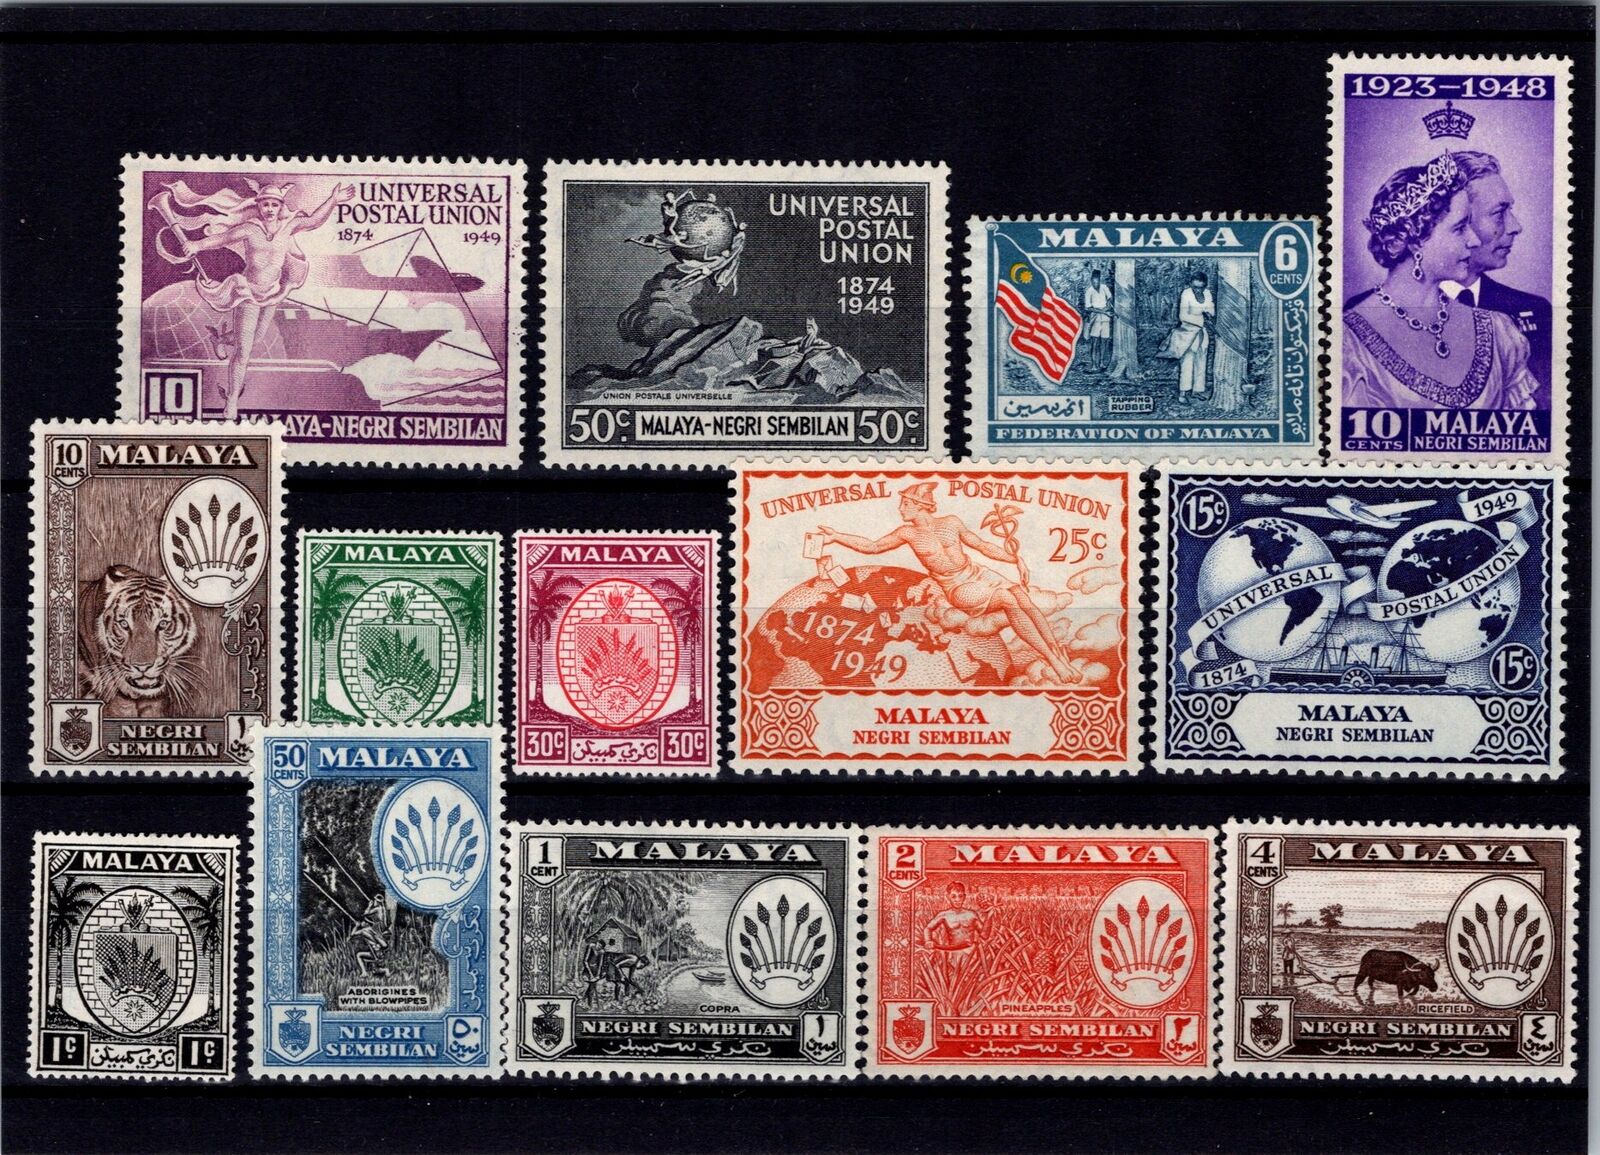 Malaysia 14 Mint - Few Possible Faults (unchecked) - H5